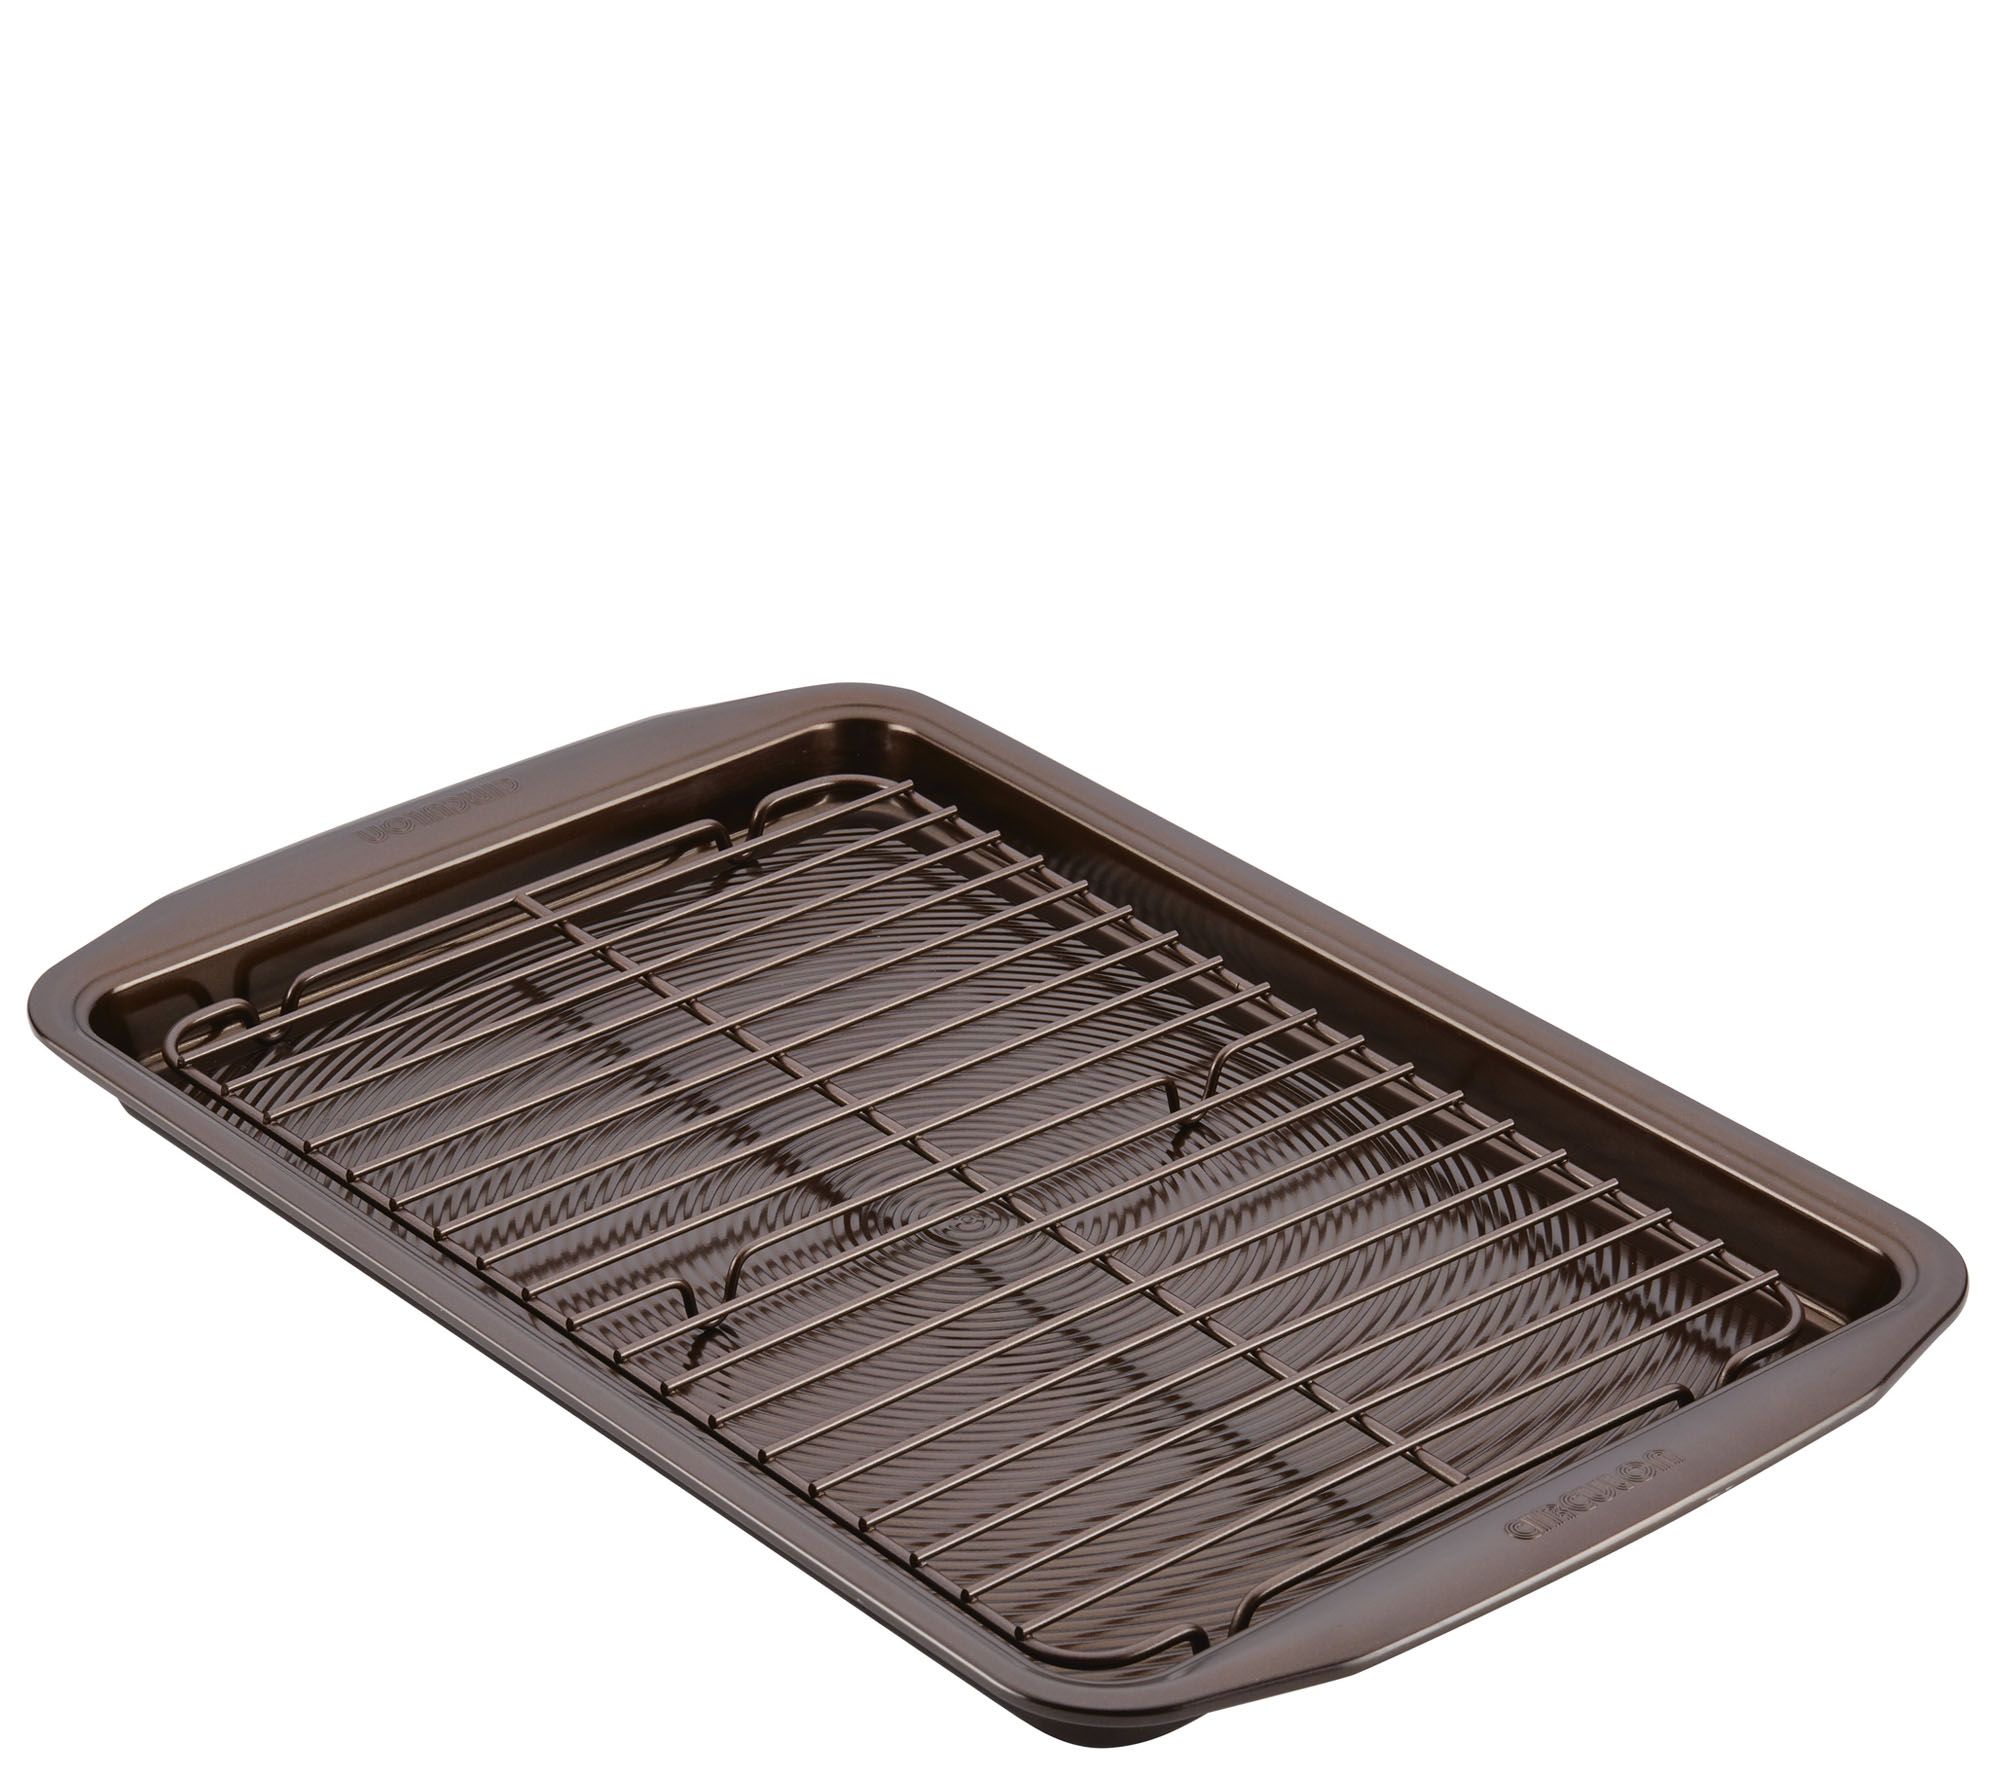 Circulon 11in x 17in Baking Sheet and Cooling R ack 3-Piece Se 